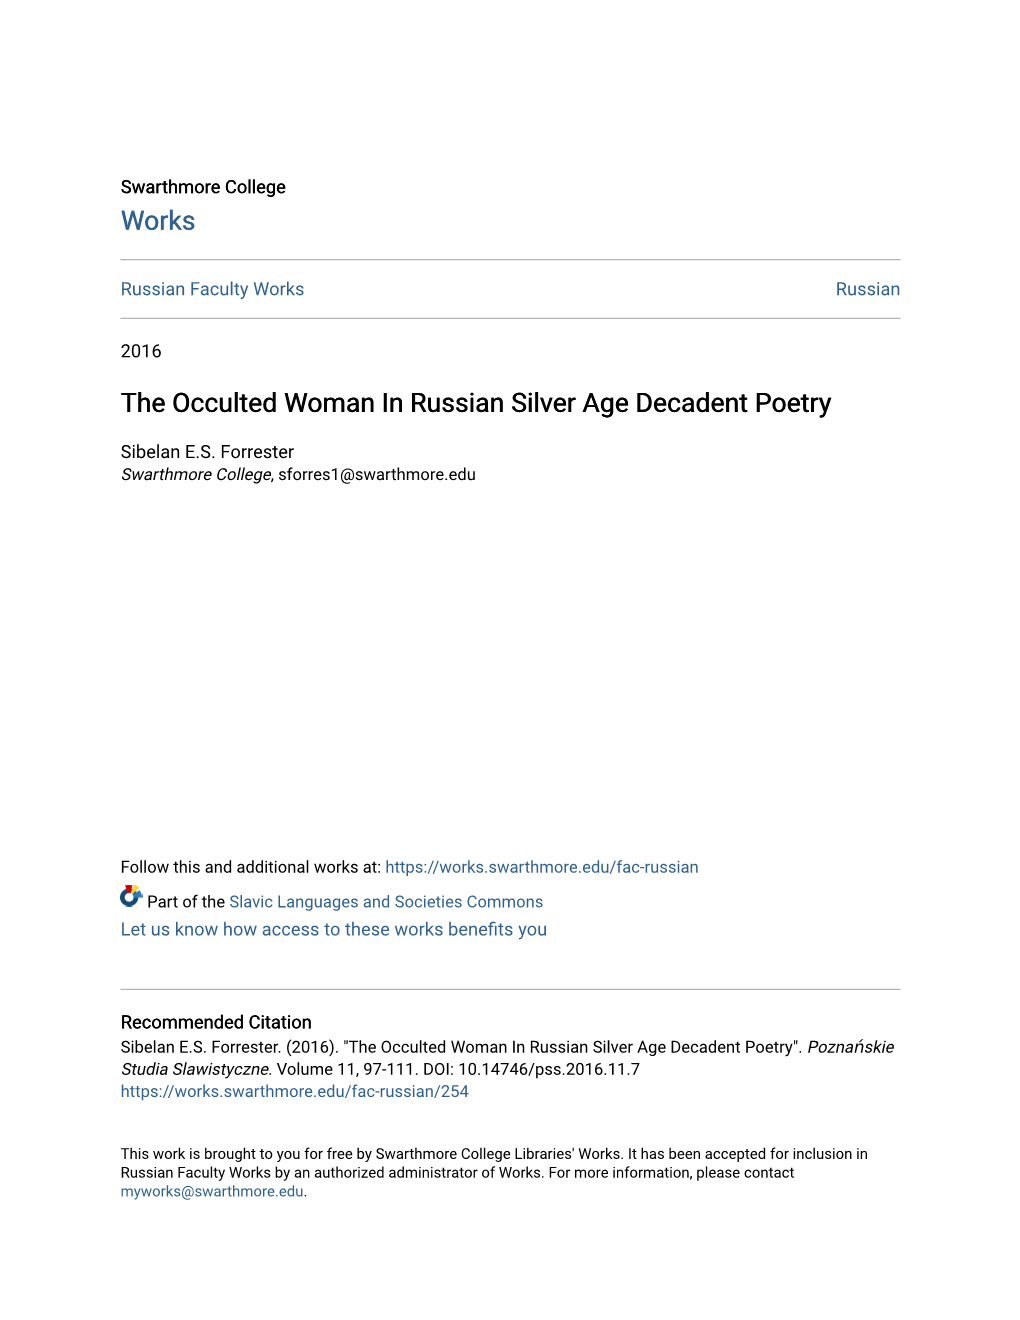 The Occulted Woman in Russian Silver Age Decadent Poetry